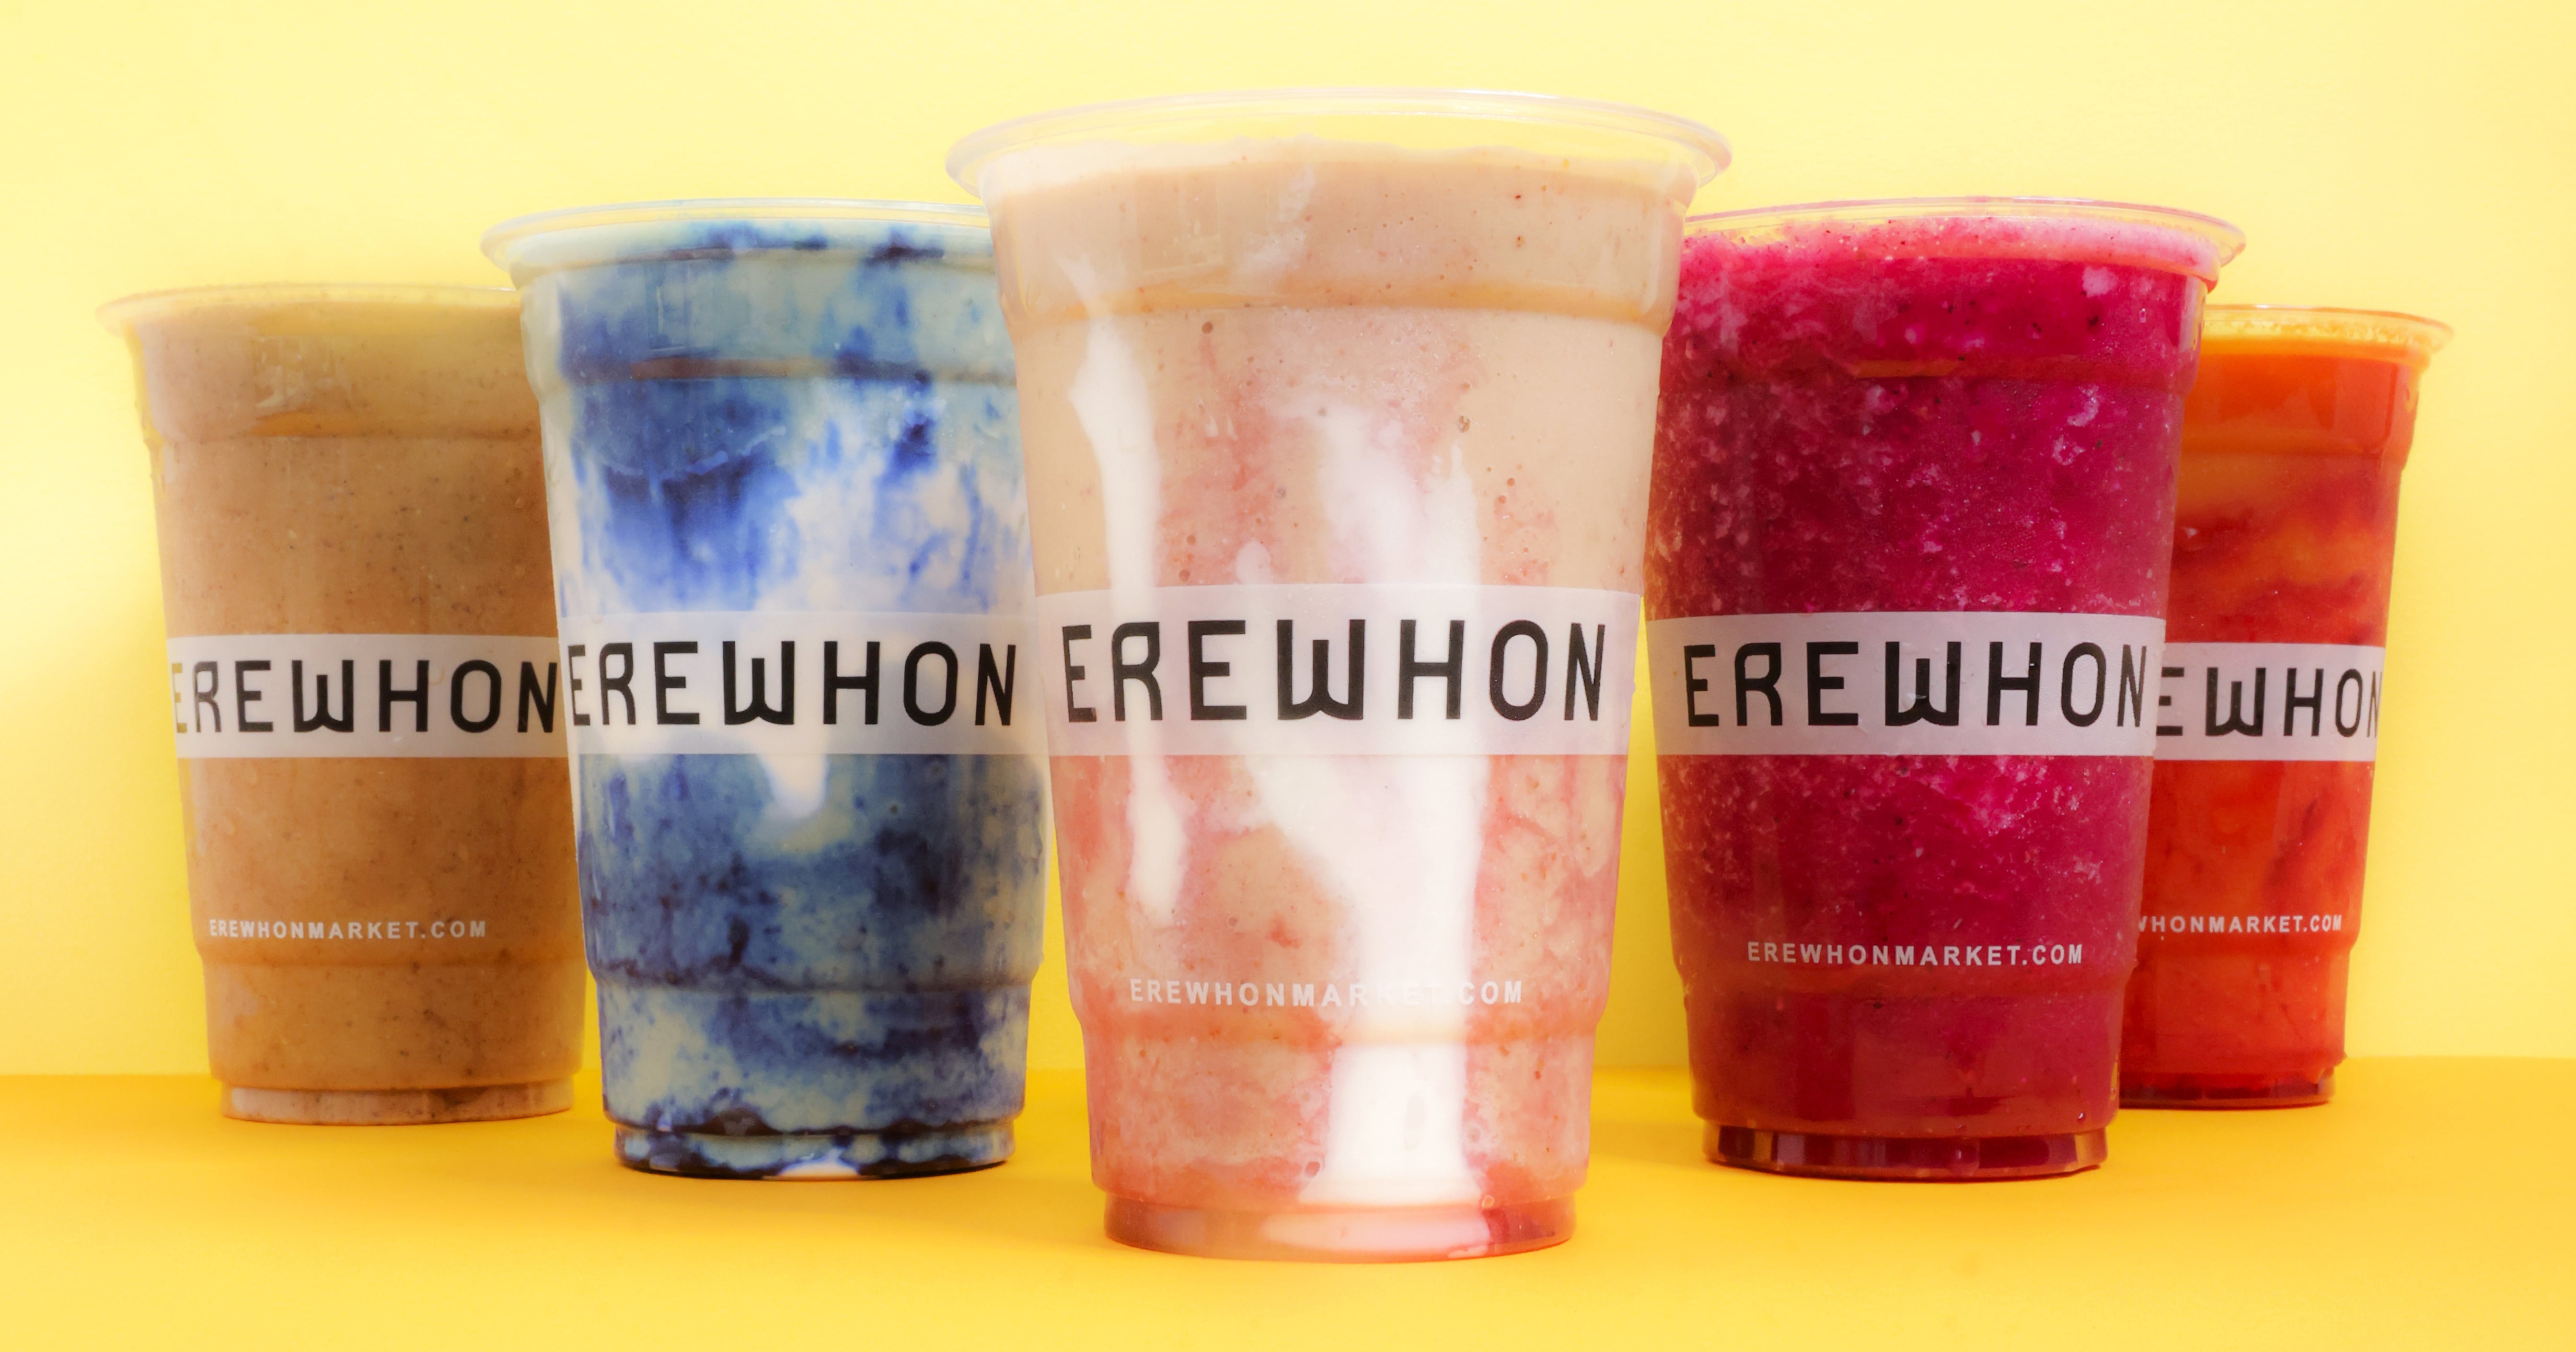 Are Erewhon Smoothies Safe to Drink While Pregnant? A Doctor Weighs In